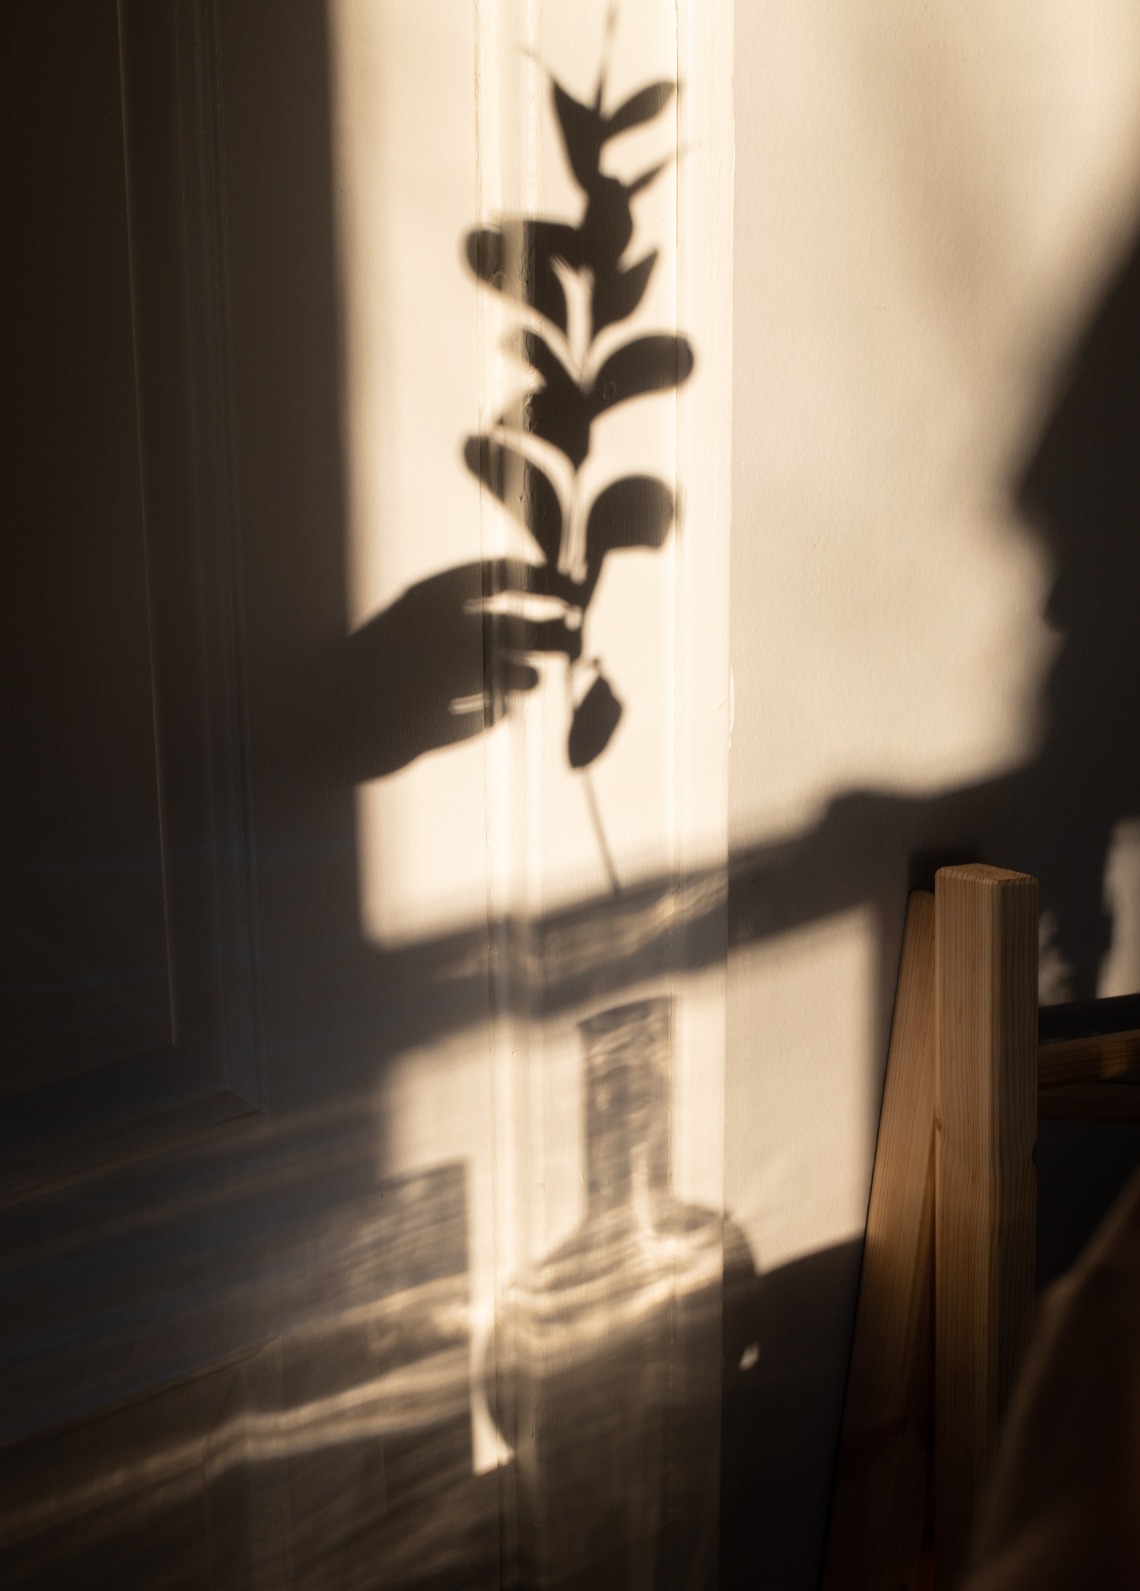 shadow of a person putting a plant into a vase